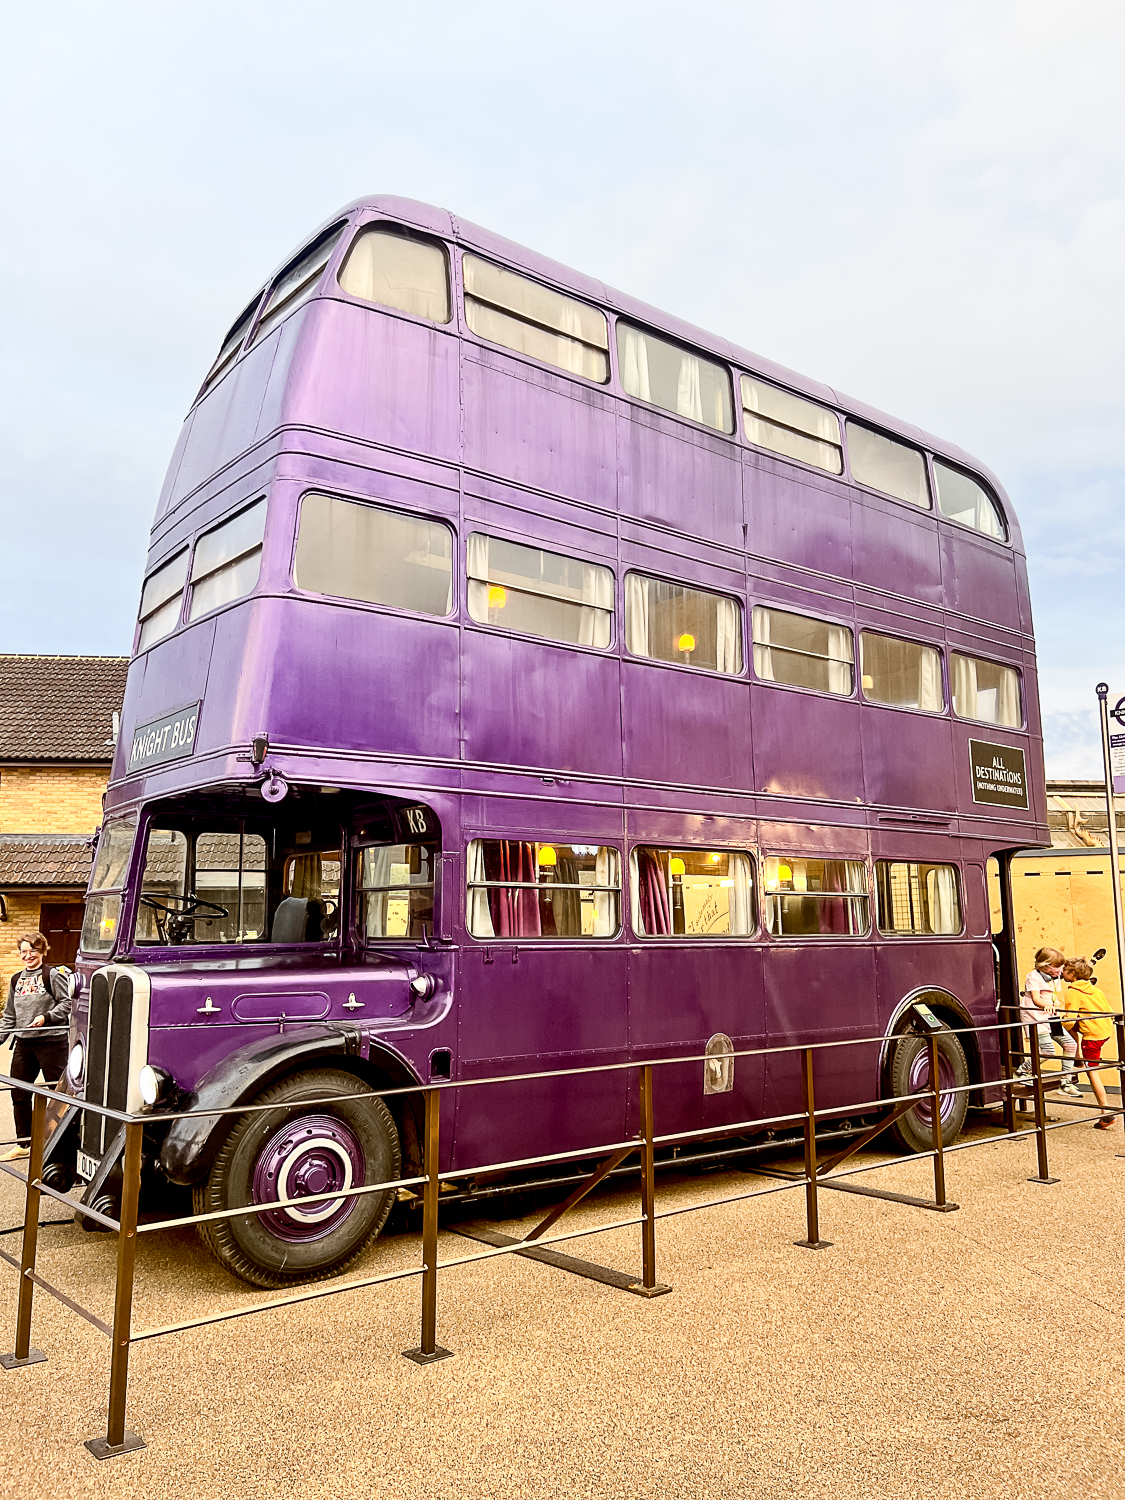 Pacific Globetrotters, budget family travel blog, shares 4 day itinerary in London with kids. Warner Brothers Studio Tour